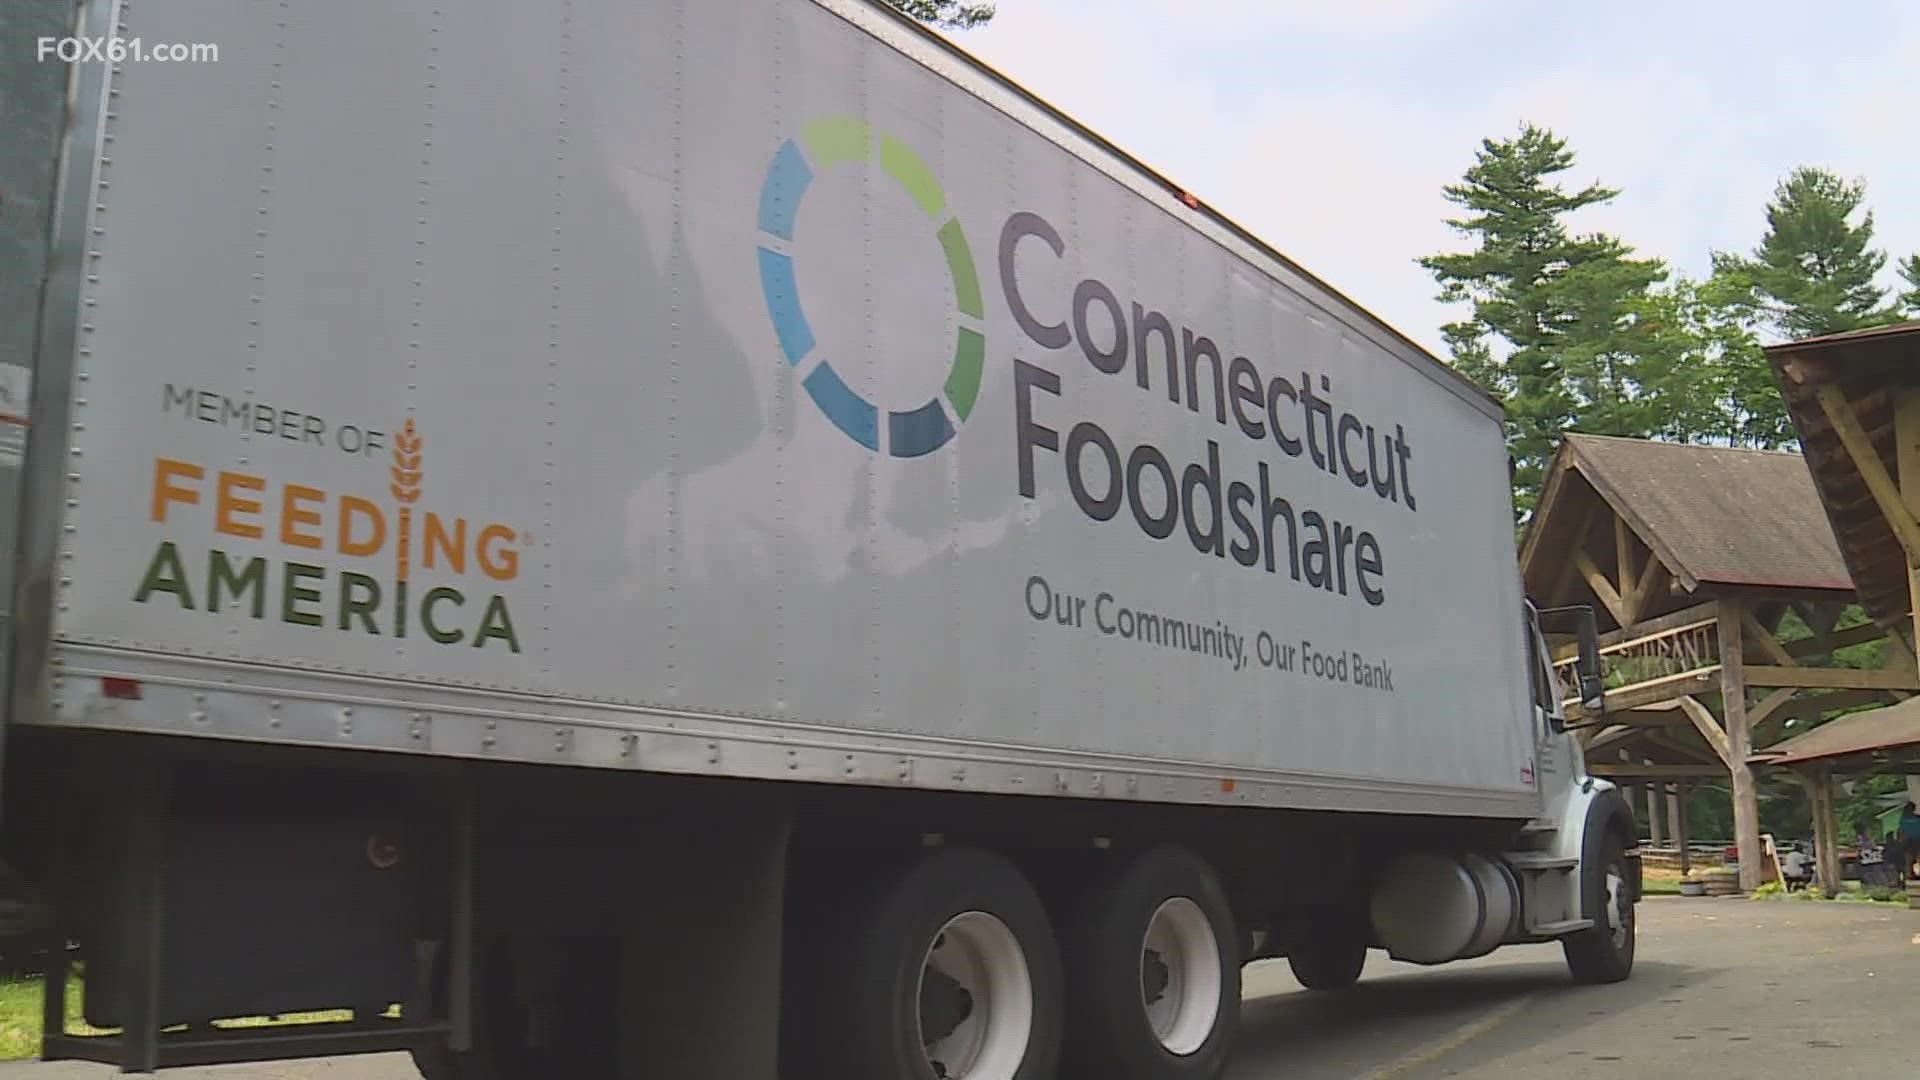 Every Thursday Connecticut Foodshare steps in to help families by giving them food bags for the weekend.